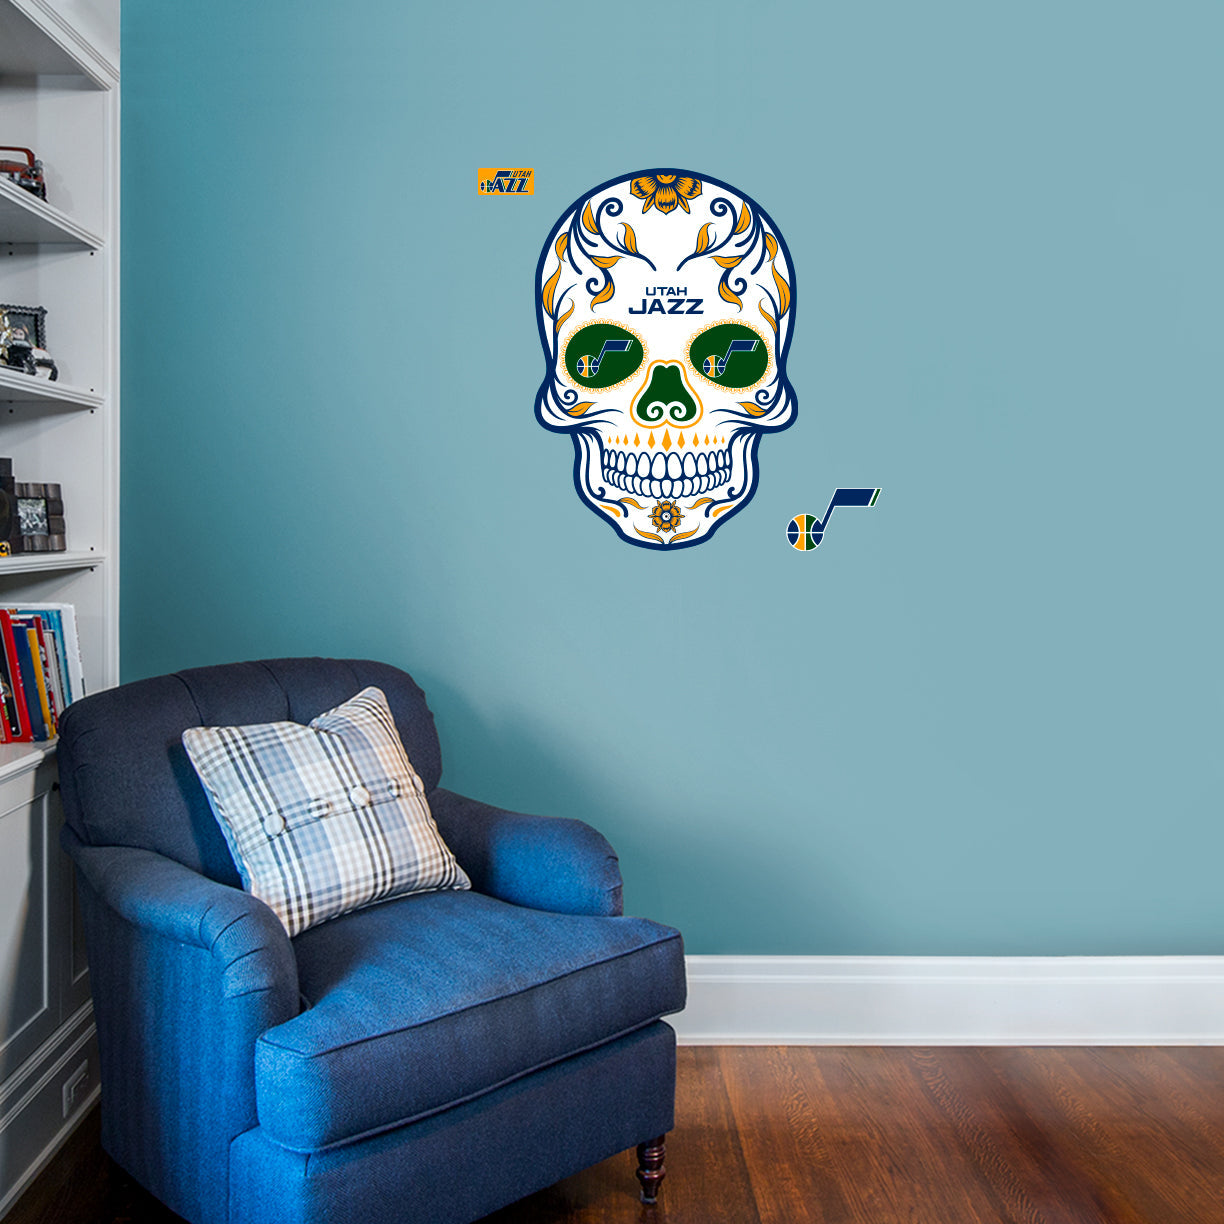 Utah Jazz: Skull - Officially Licensed NBA Removable Adhesive Decal